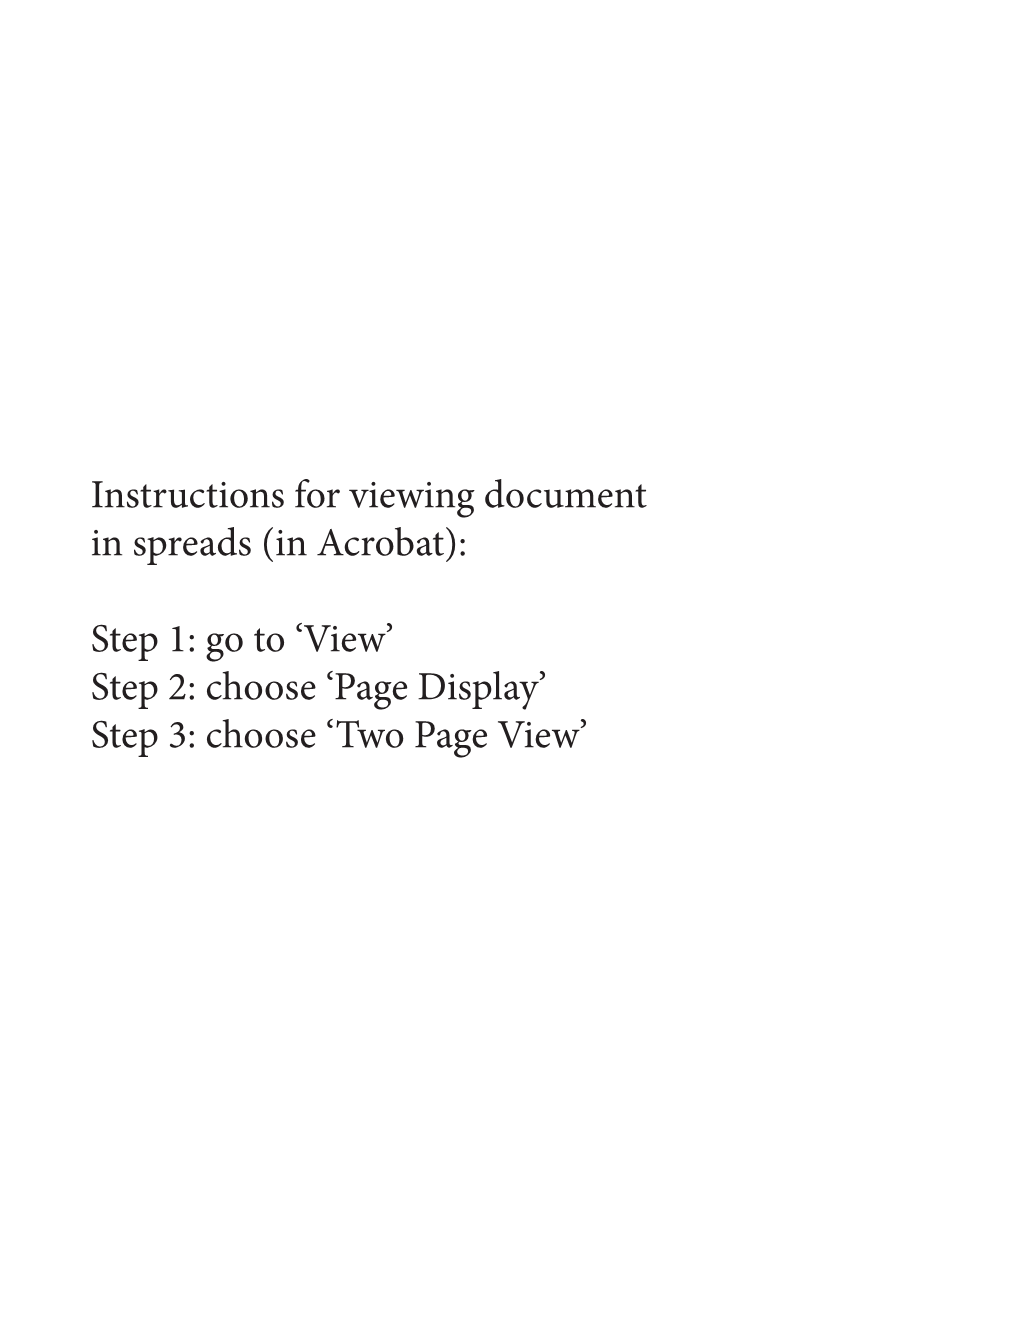 Instructions for Viewing Document in Spreads (In Acrobat): Step 1